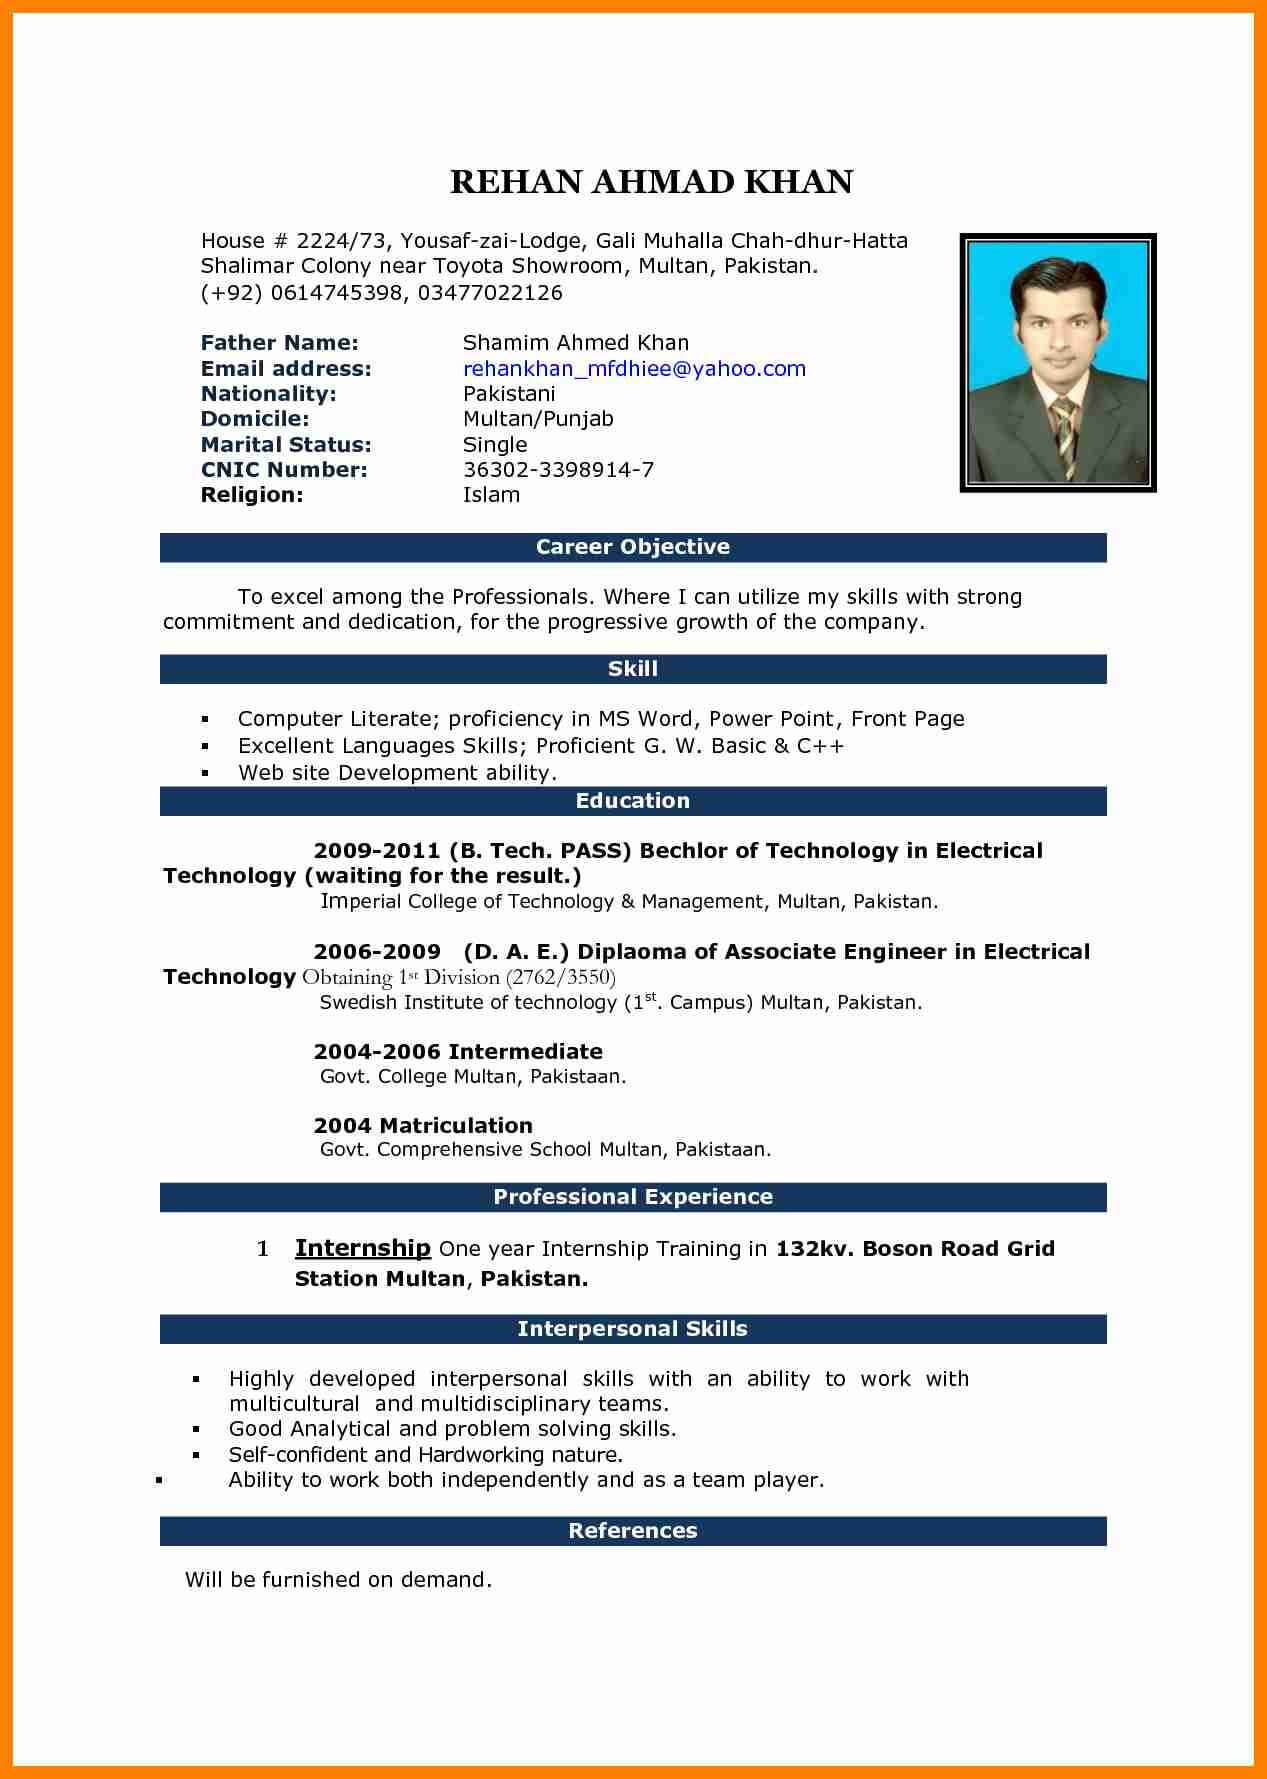 Resume Format Doc For Back Office Executive Admin Assistant For Free Basic Resume Templates Microsoft Word